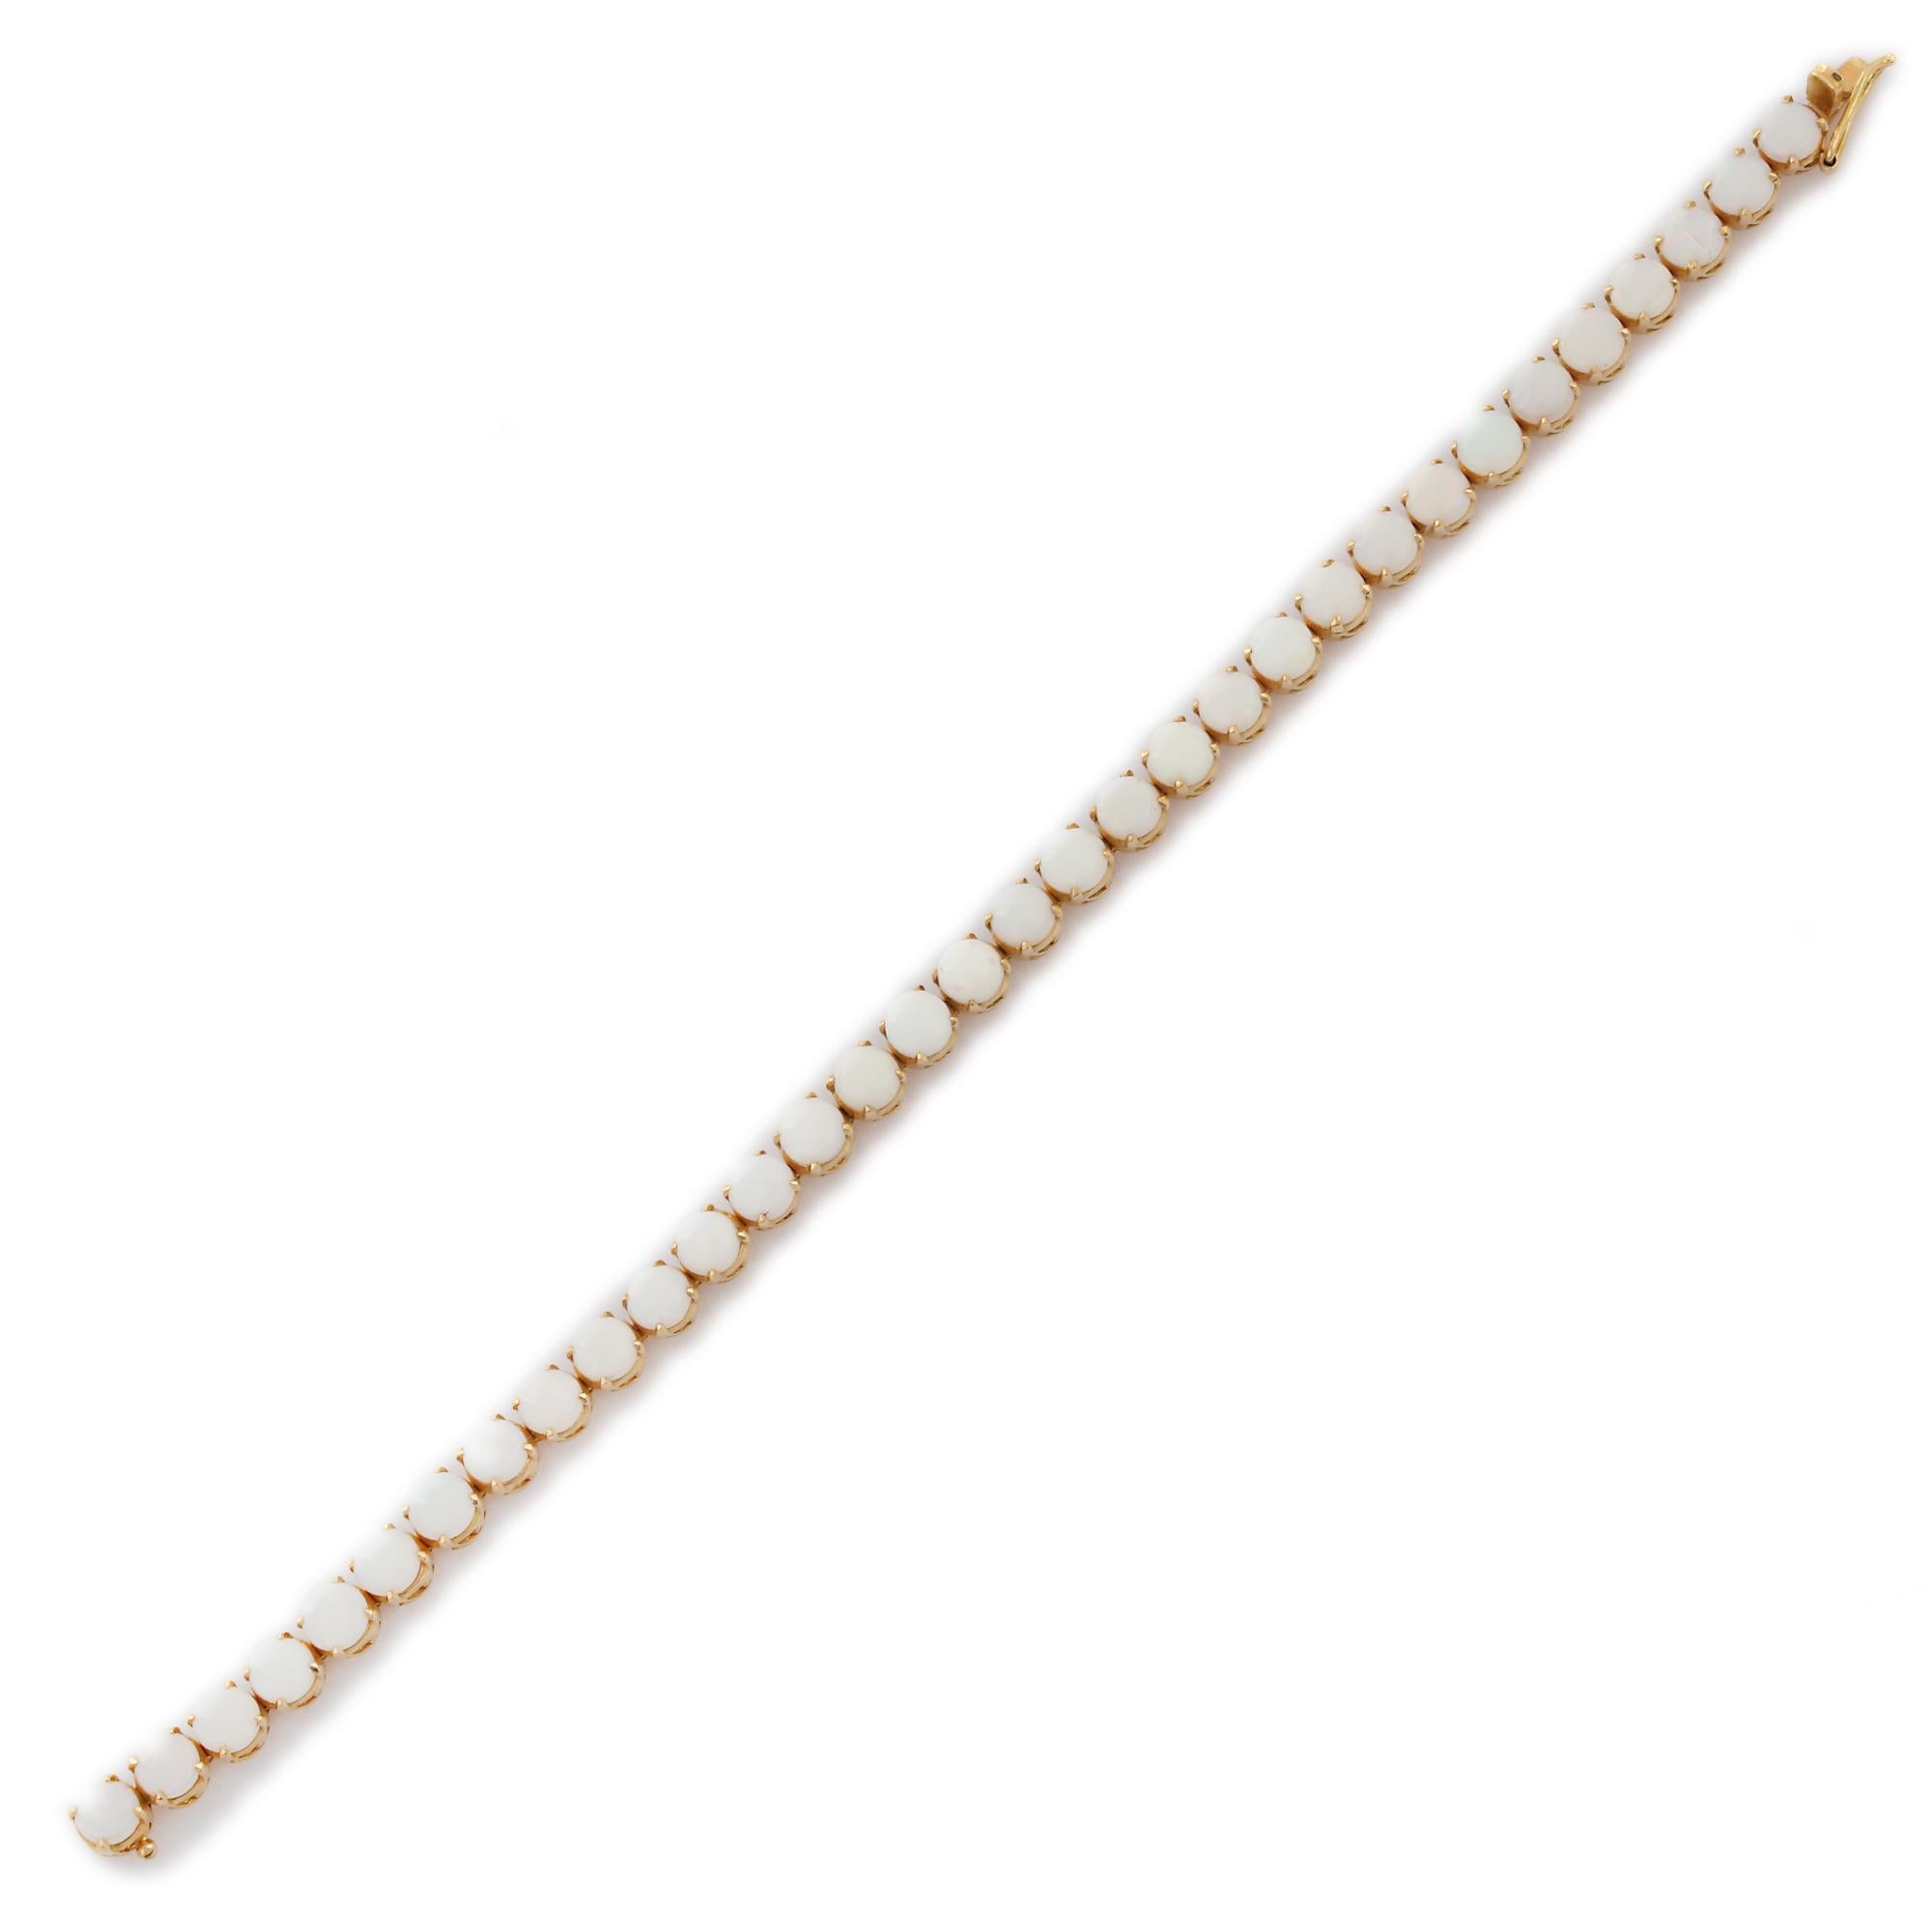 This Round Cut White Opal Tennis Bracelet in 18K gold showcases 33 endlessly sparkling natural opal, weighing 10.1 carats. It measures 7.25 inches long in length. 
Opal enhances creativity, passion and strength.
Designed with perfect round cut opal